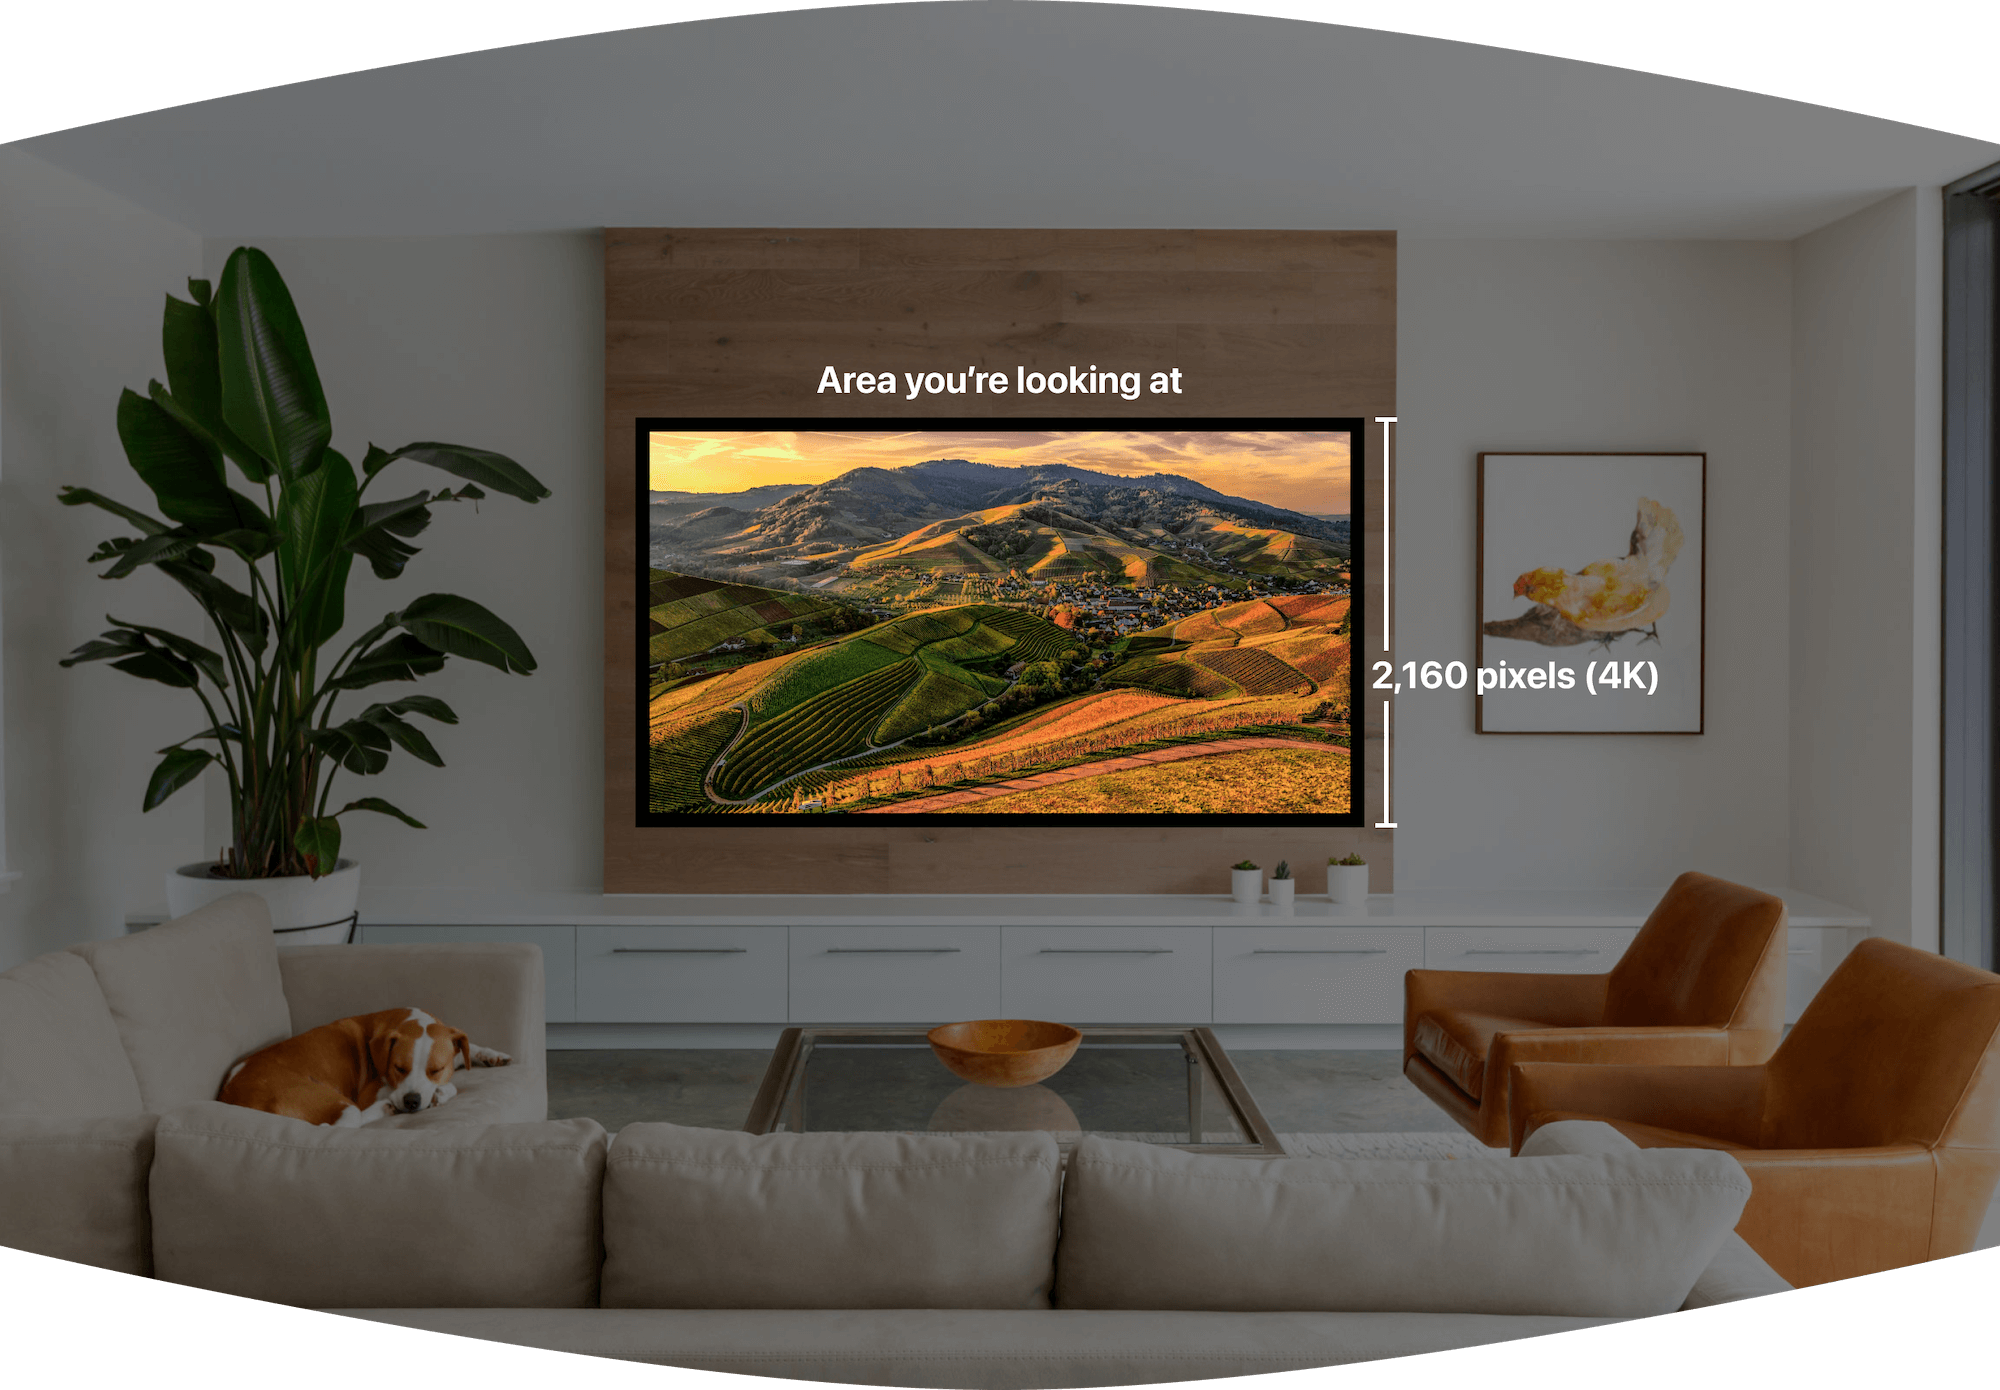 A TV in a living room in the center of your vision, labeled as 2160 pixels in height.